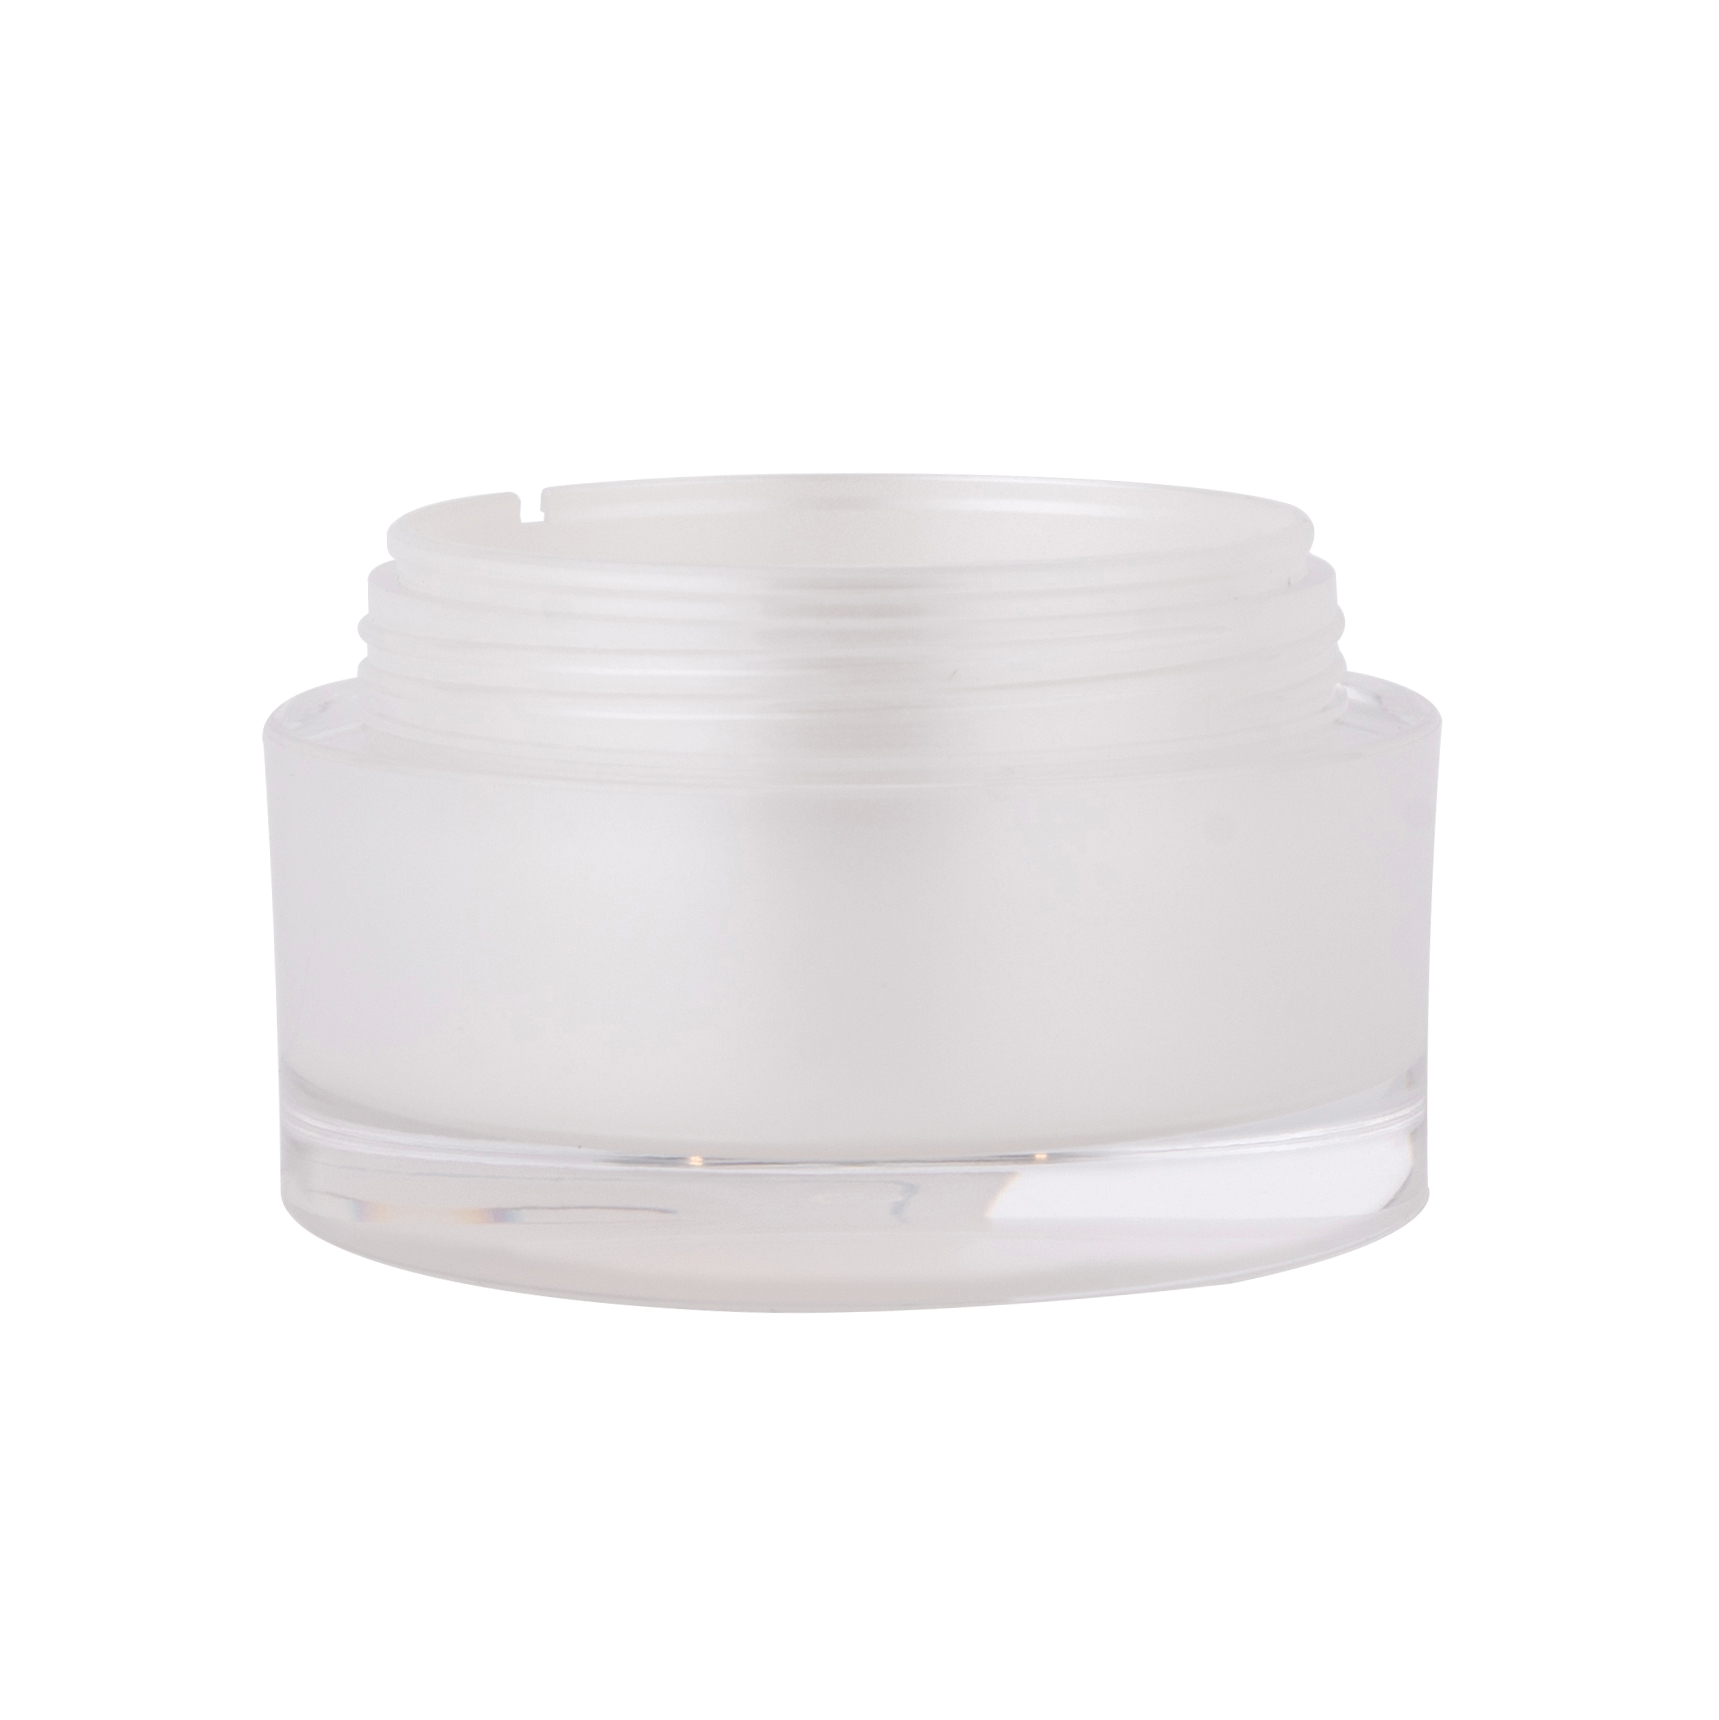 5g 10g 15g 30g 50g 80g 100g Sustainable Refillable Cosmetic Jar High Quality Replaceable Cream Jar For Skincare